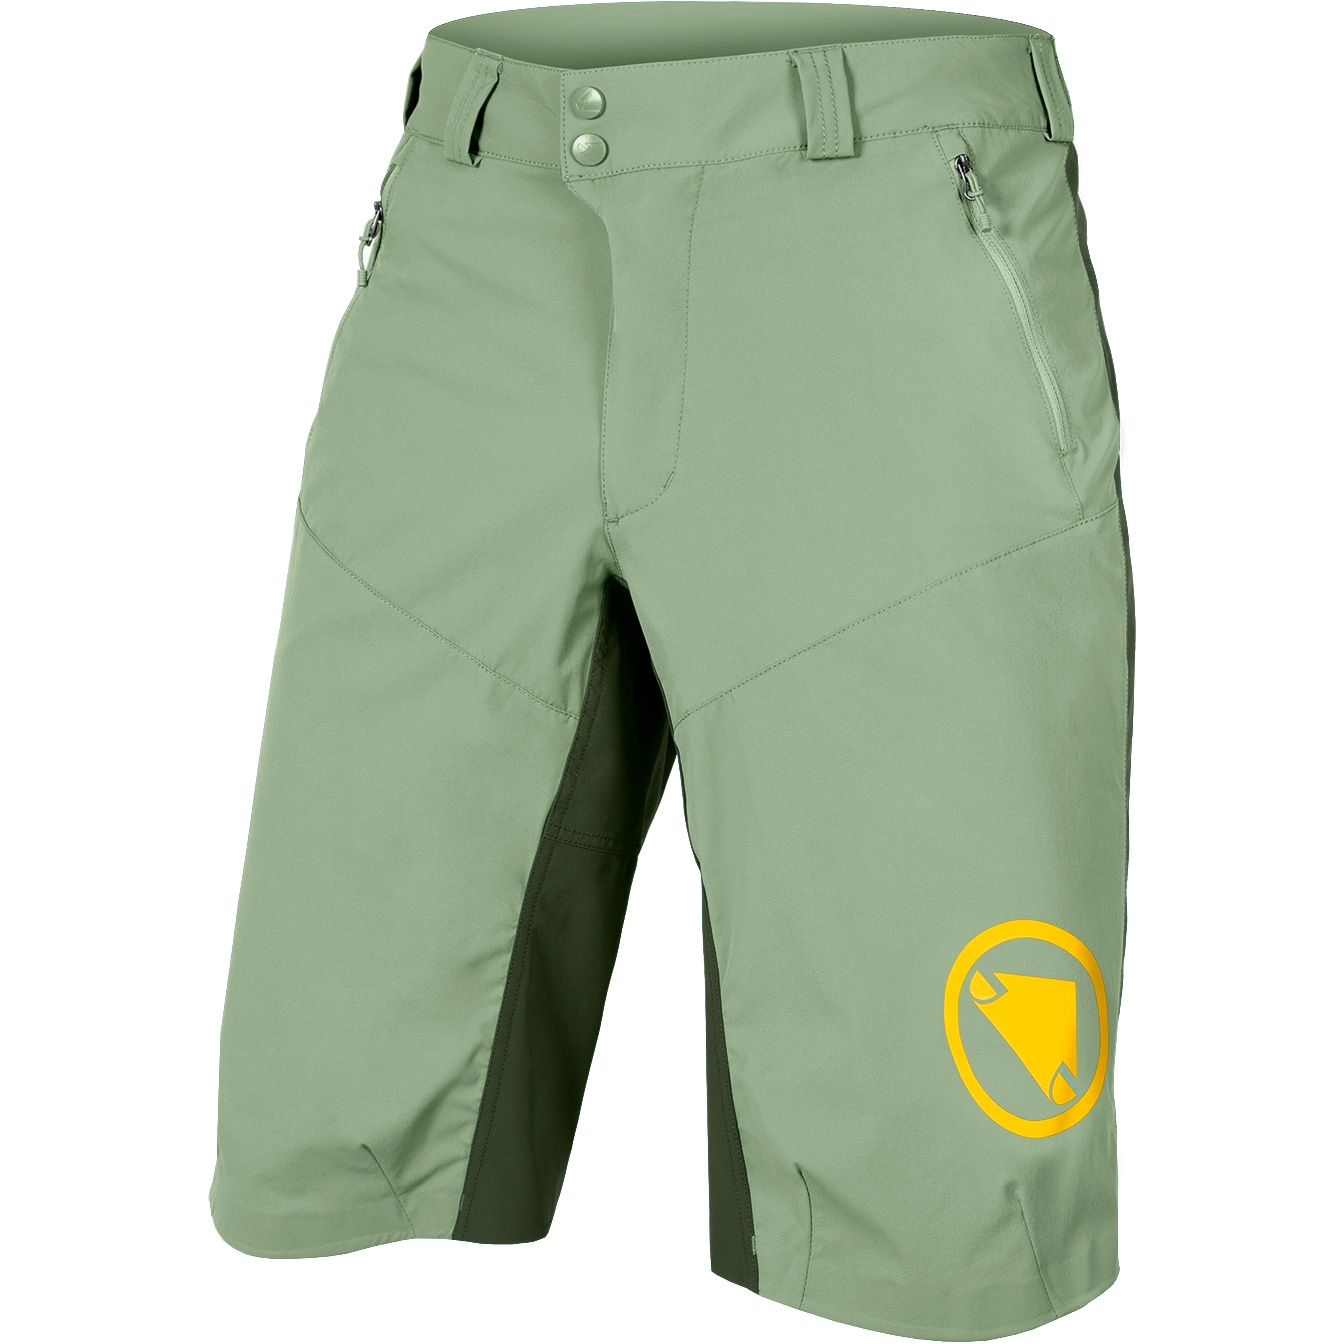 Picture of Endura MT500 Spray Shorts - bottle green